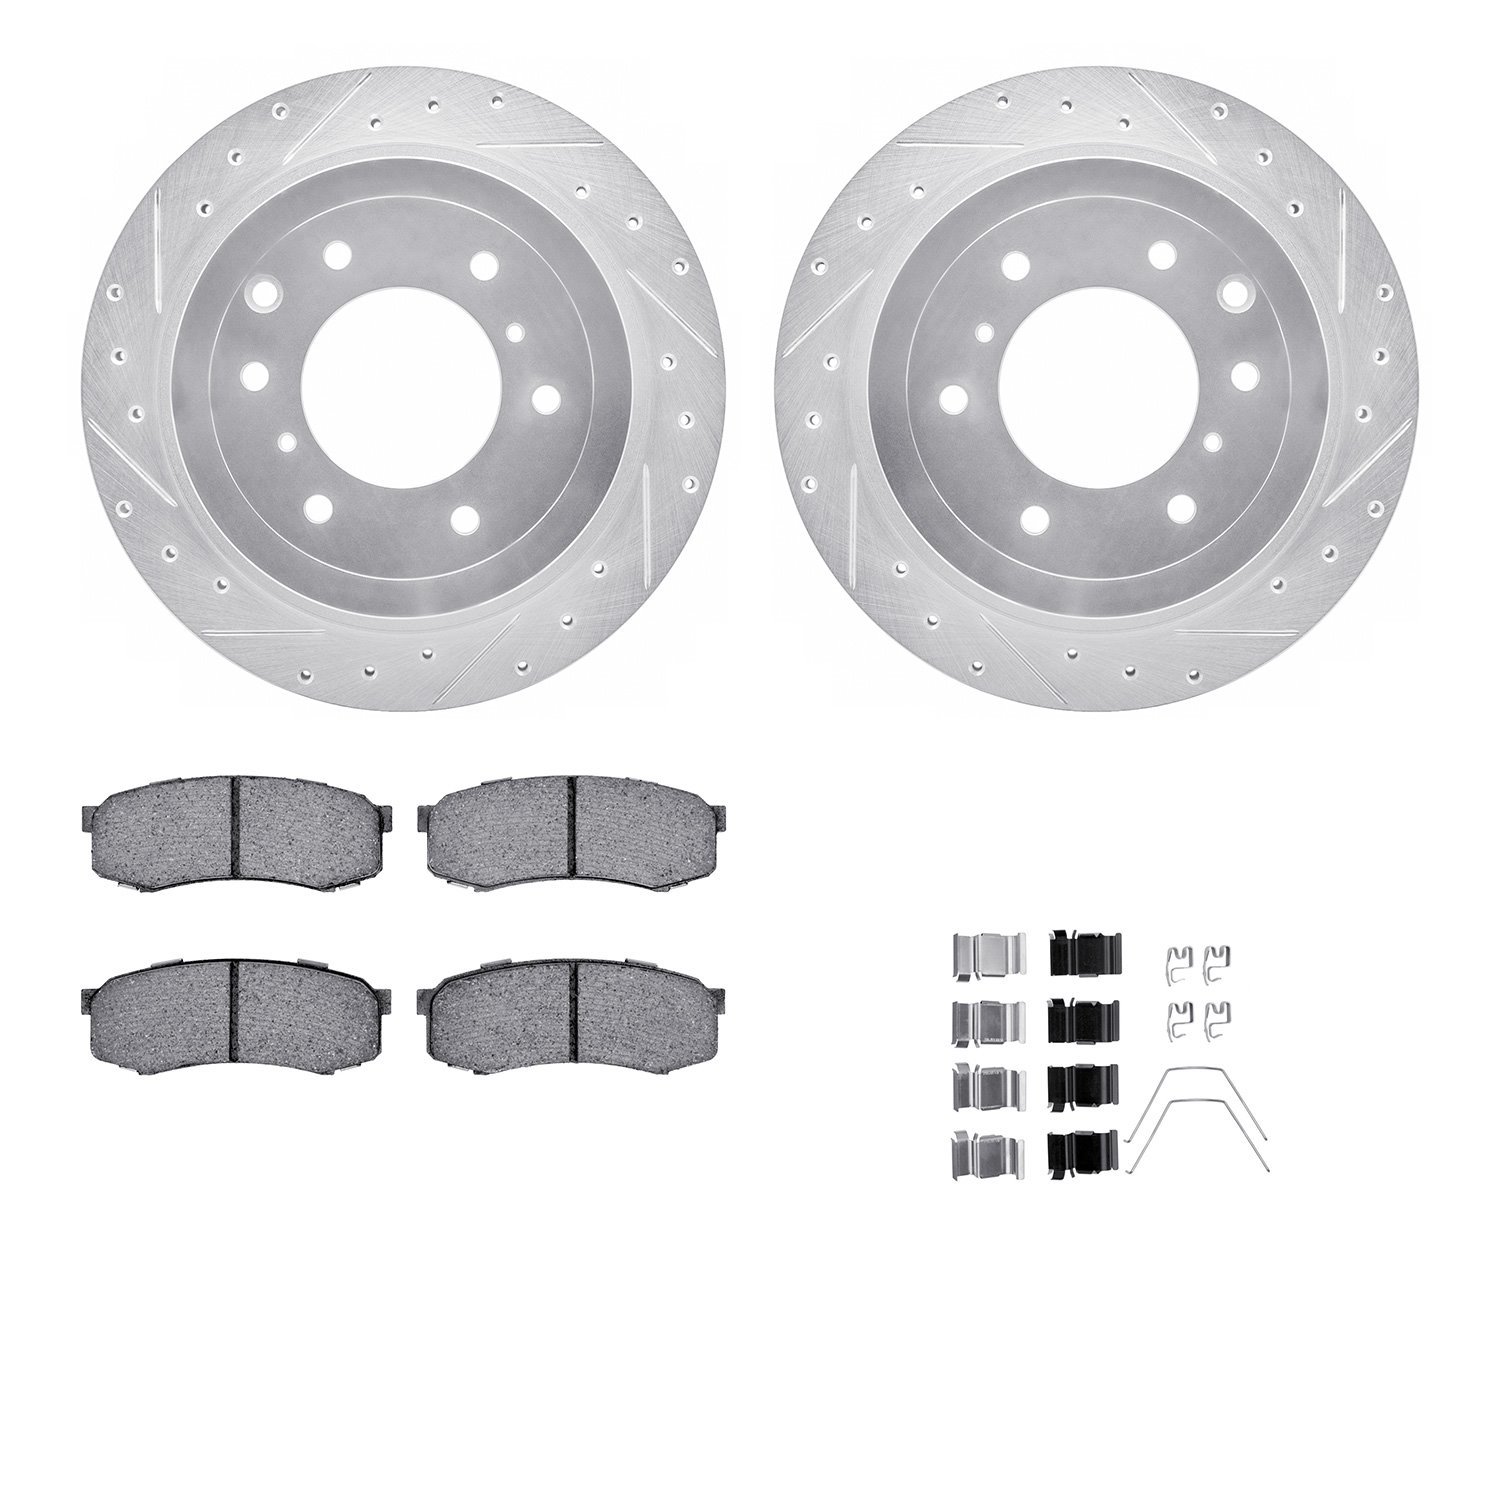 7412-92003 Drilled/Slotted Brake Rotors with Ultimate-Duty Brake Pads Kit & Hardware [Silver], 2008-2014 Mitsubishi, Position: R